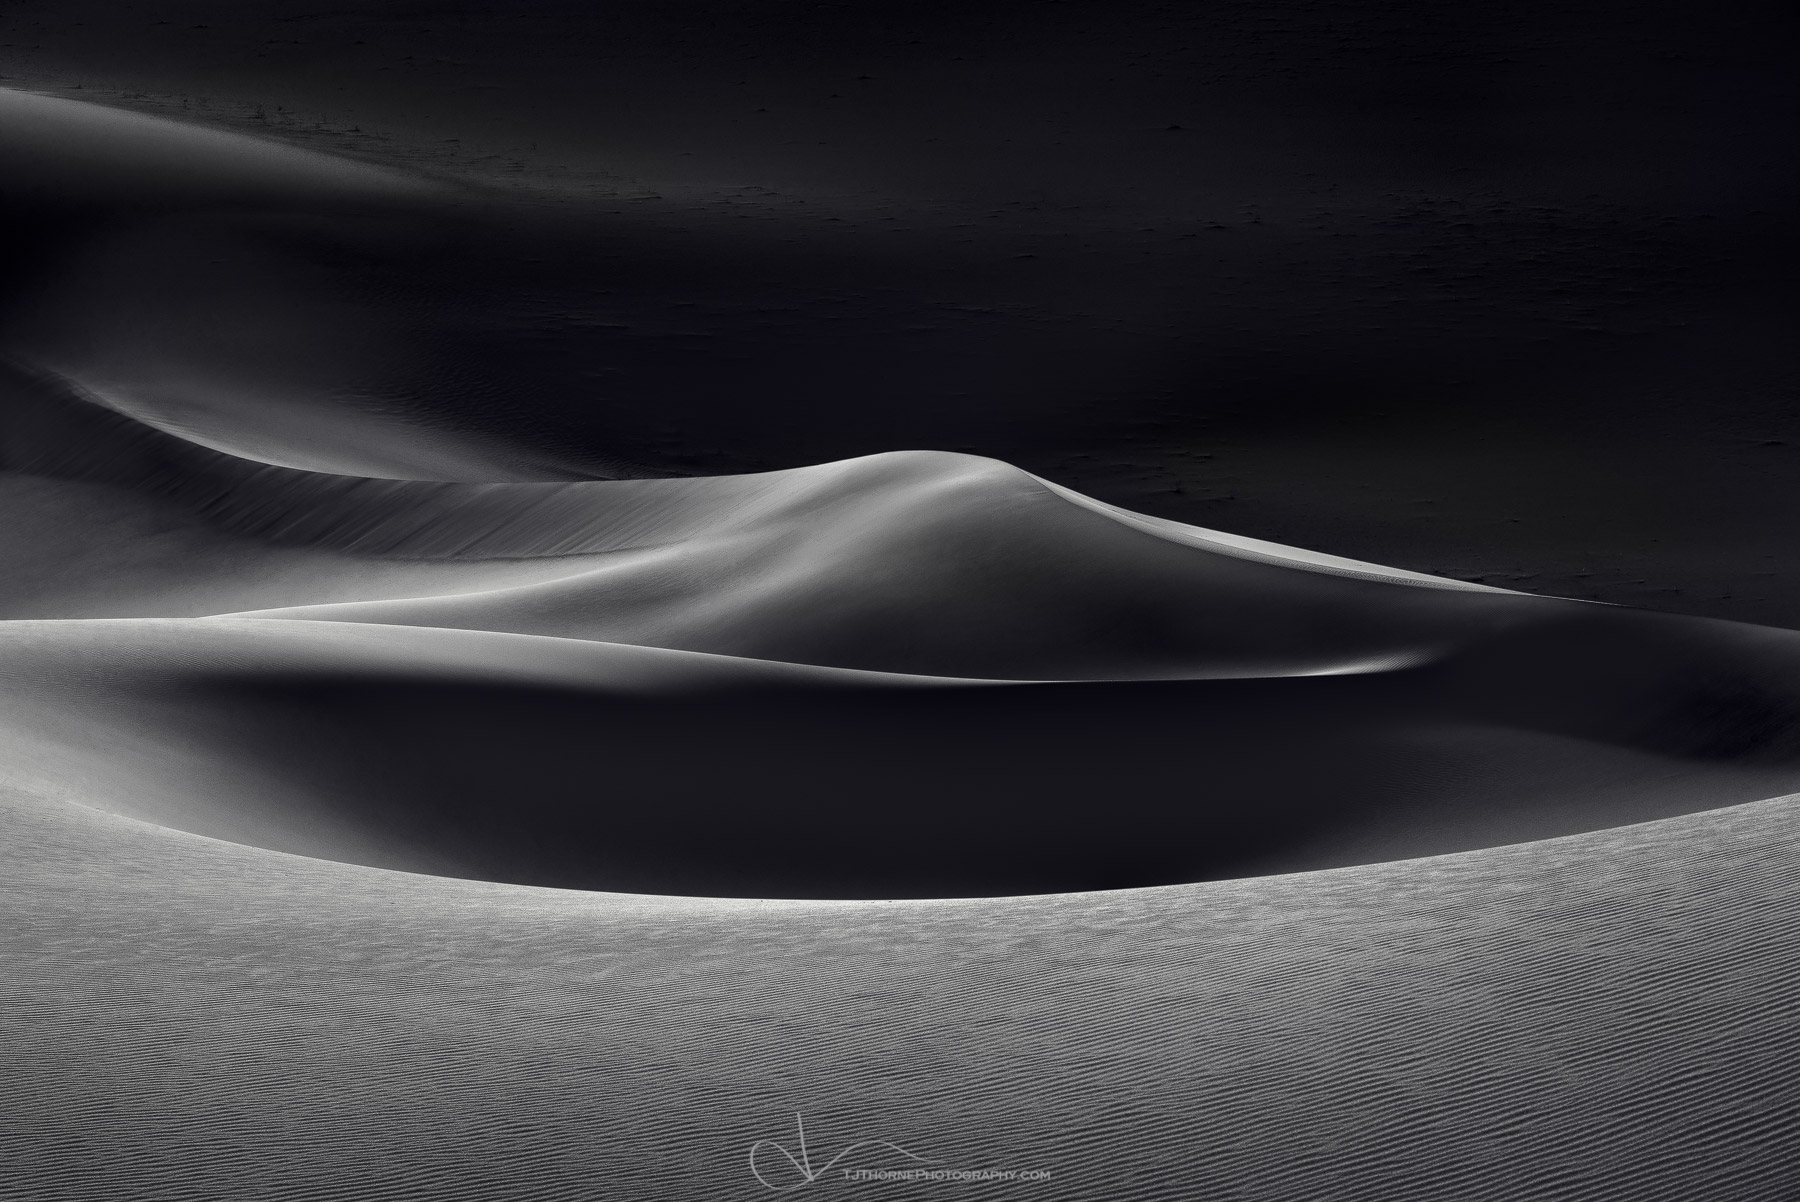 Evening light plays on some remote sand dunes in Death Valley National Park, California.